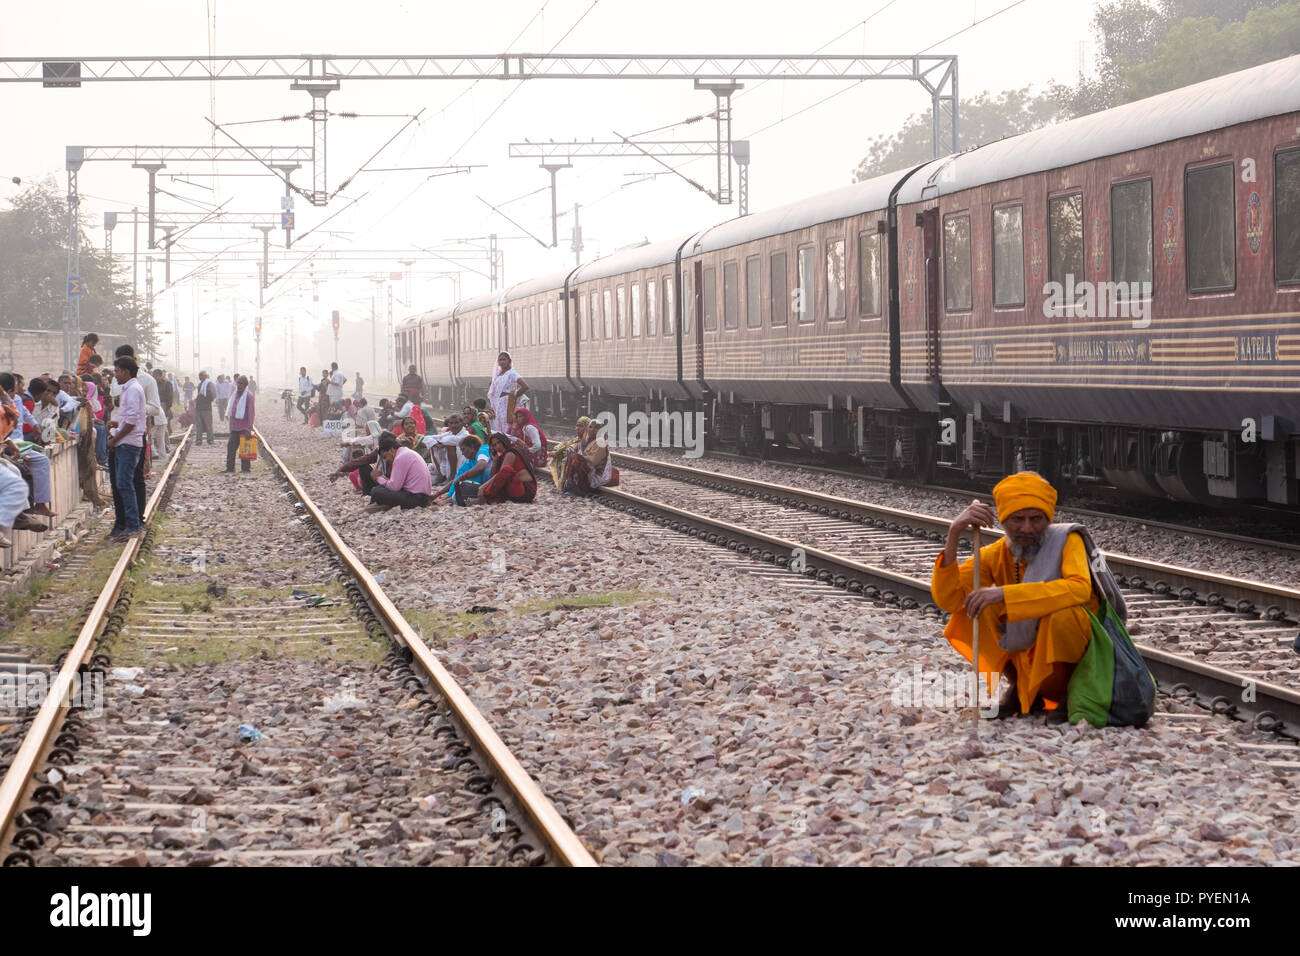 Indian passengers waiting on the rail tracks for a train to arrive, India Stock Photo